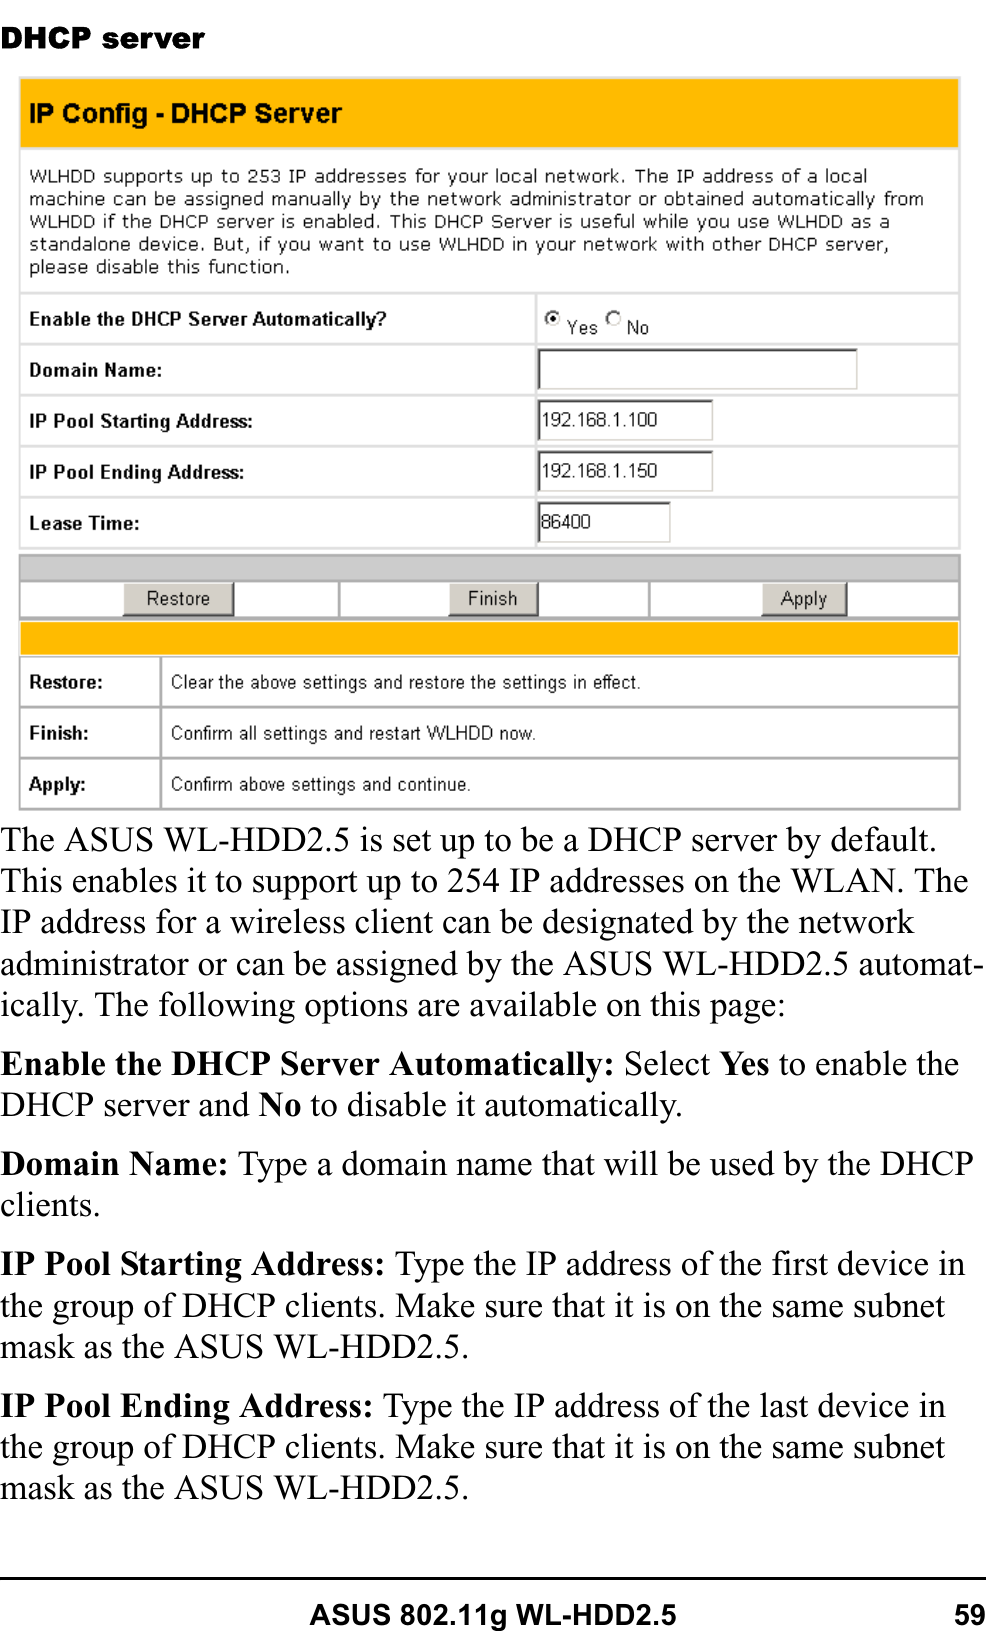 ASUS 802.11g WL-HDD2.5 59DHCP serverThe ASUS WL-HDD2.5 is set up to be a DHCP server by default. This enables it to support up to 254 IP addresses on the WLAN. The IP address for a wireless client can be designated by the network administrator or can be assigned by the ASUS WL-HDD2.5 automat-ically. The following options are available on this page:Enable the DHCP Server Automatically: Select Ye s  to enable the DHCP server and No to disable it automatically.Domain Name: Type a domain name that will be used by the DHCP clients.IP Pool Starting Address: Type the IP address of the first device in the group of DHCP clients. Make sure that it is on the same subnet mask as the ASUS WL-HDD2.5.IP Pool Ending Address: Type the IP address of the last device in the group of DHCP clients. Make sure that it is on the same subnet mask as the ASUS WL-HDD2.5.